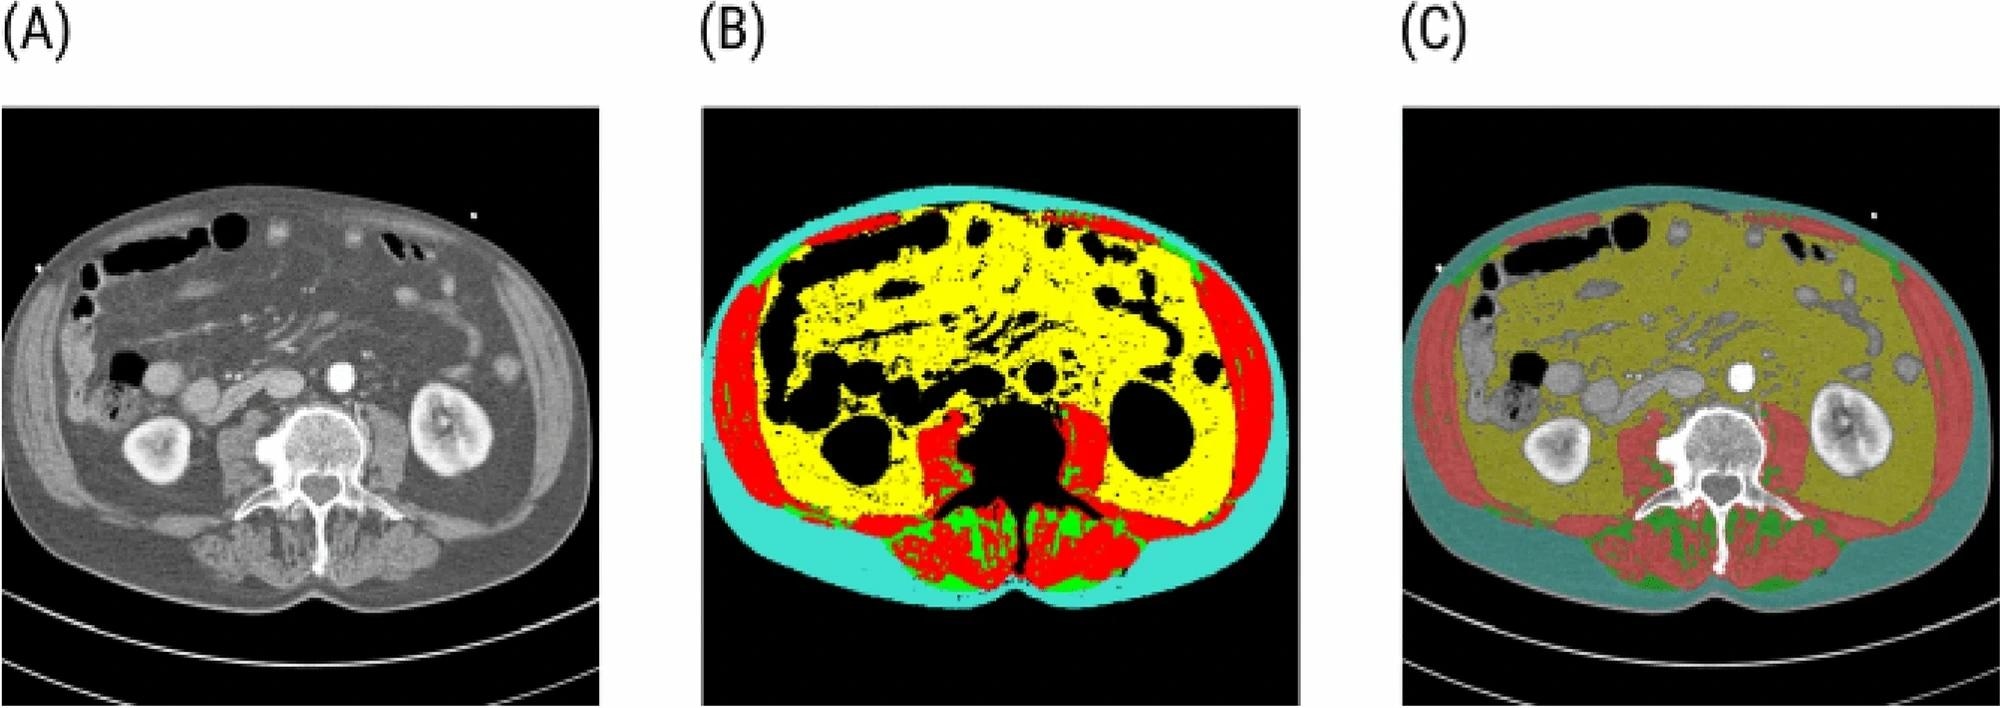 Segmentation of the CT L3 scan cross-section. (A) An example of a raw CT cross-section at the third lumbar vertebra level. (B) The segmentation map consists of the skeletal muscle tissue (red), intramuscular adipose tissue (green), visceral adipose tissue (yellow), and subcutaneous adipose tissue (turquoise). The black areas are excluded from the analysis. (C) An overlay of the segmentation map with the CT cross-section. https://www.nature.com/articles/s41598-024-59134-z